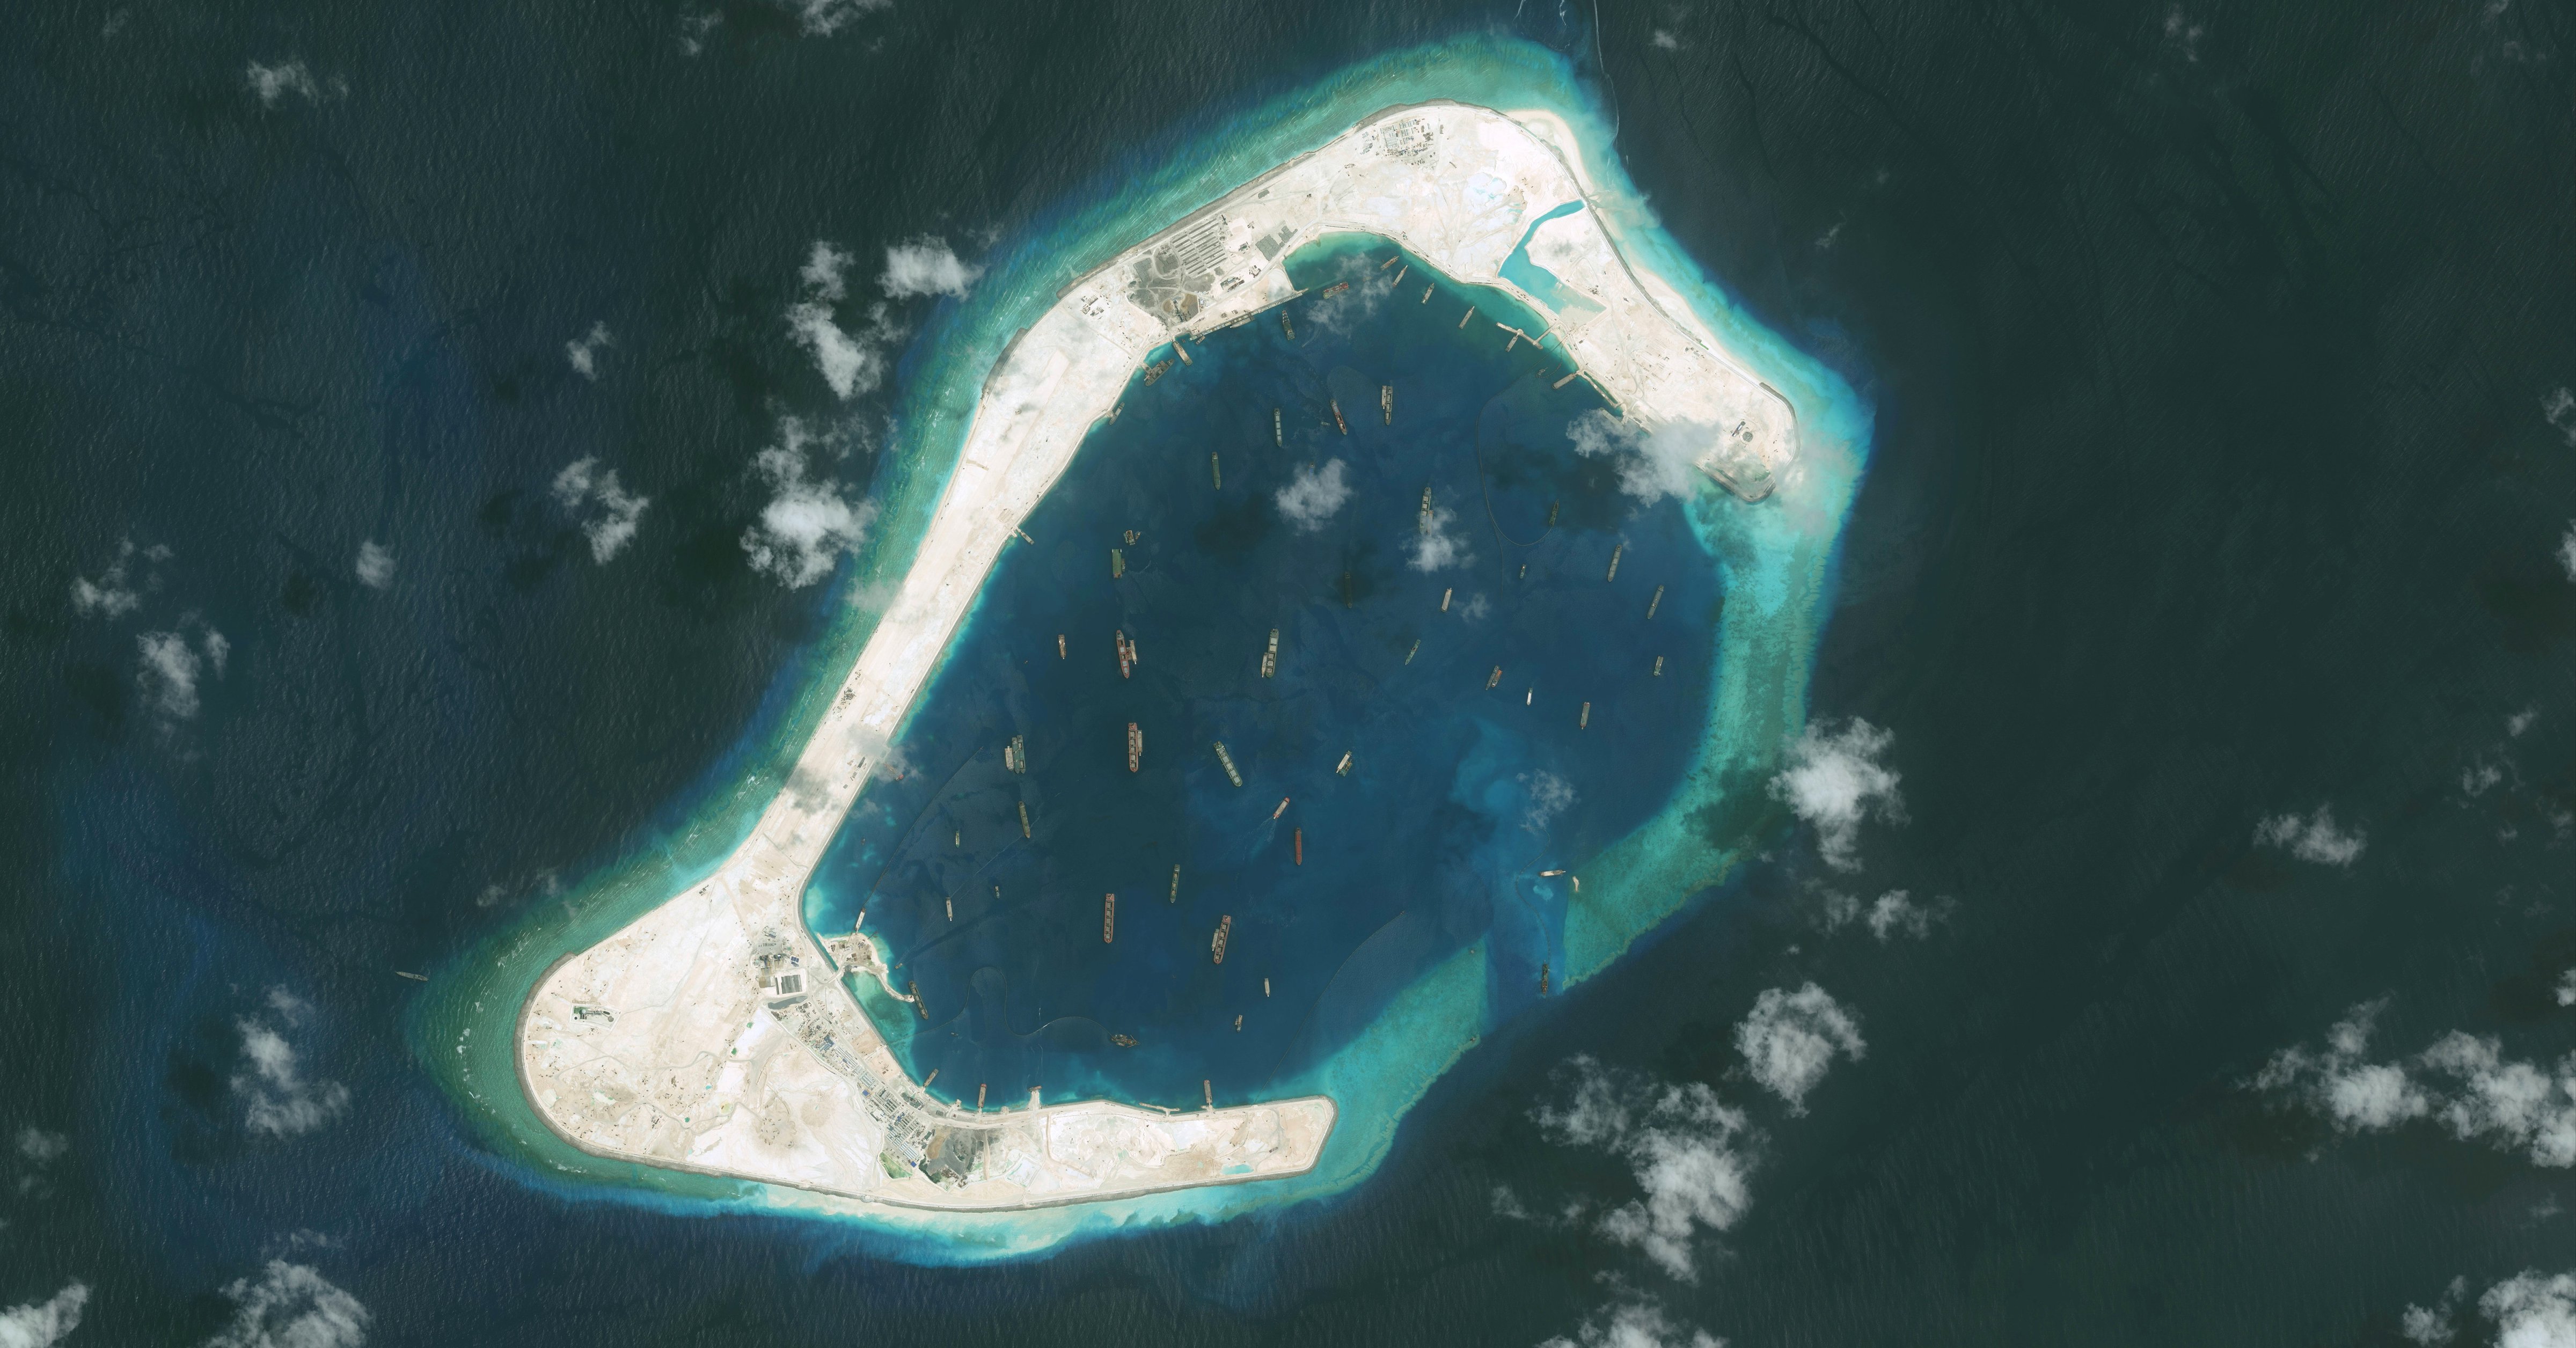 DigitalGlobe imagery shows the Subi Reef in the South China Sea, a part of the Spratly Islands group, on Sept. 1, 2015 (DigitalGlobe/ScapeWare3d/Getty Images)